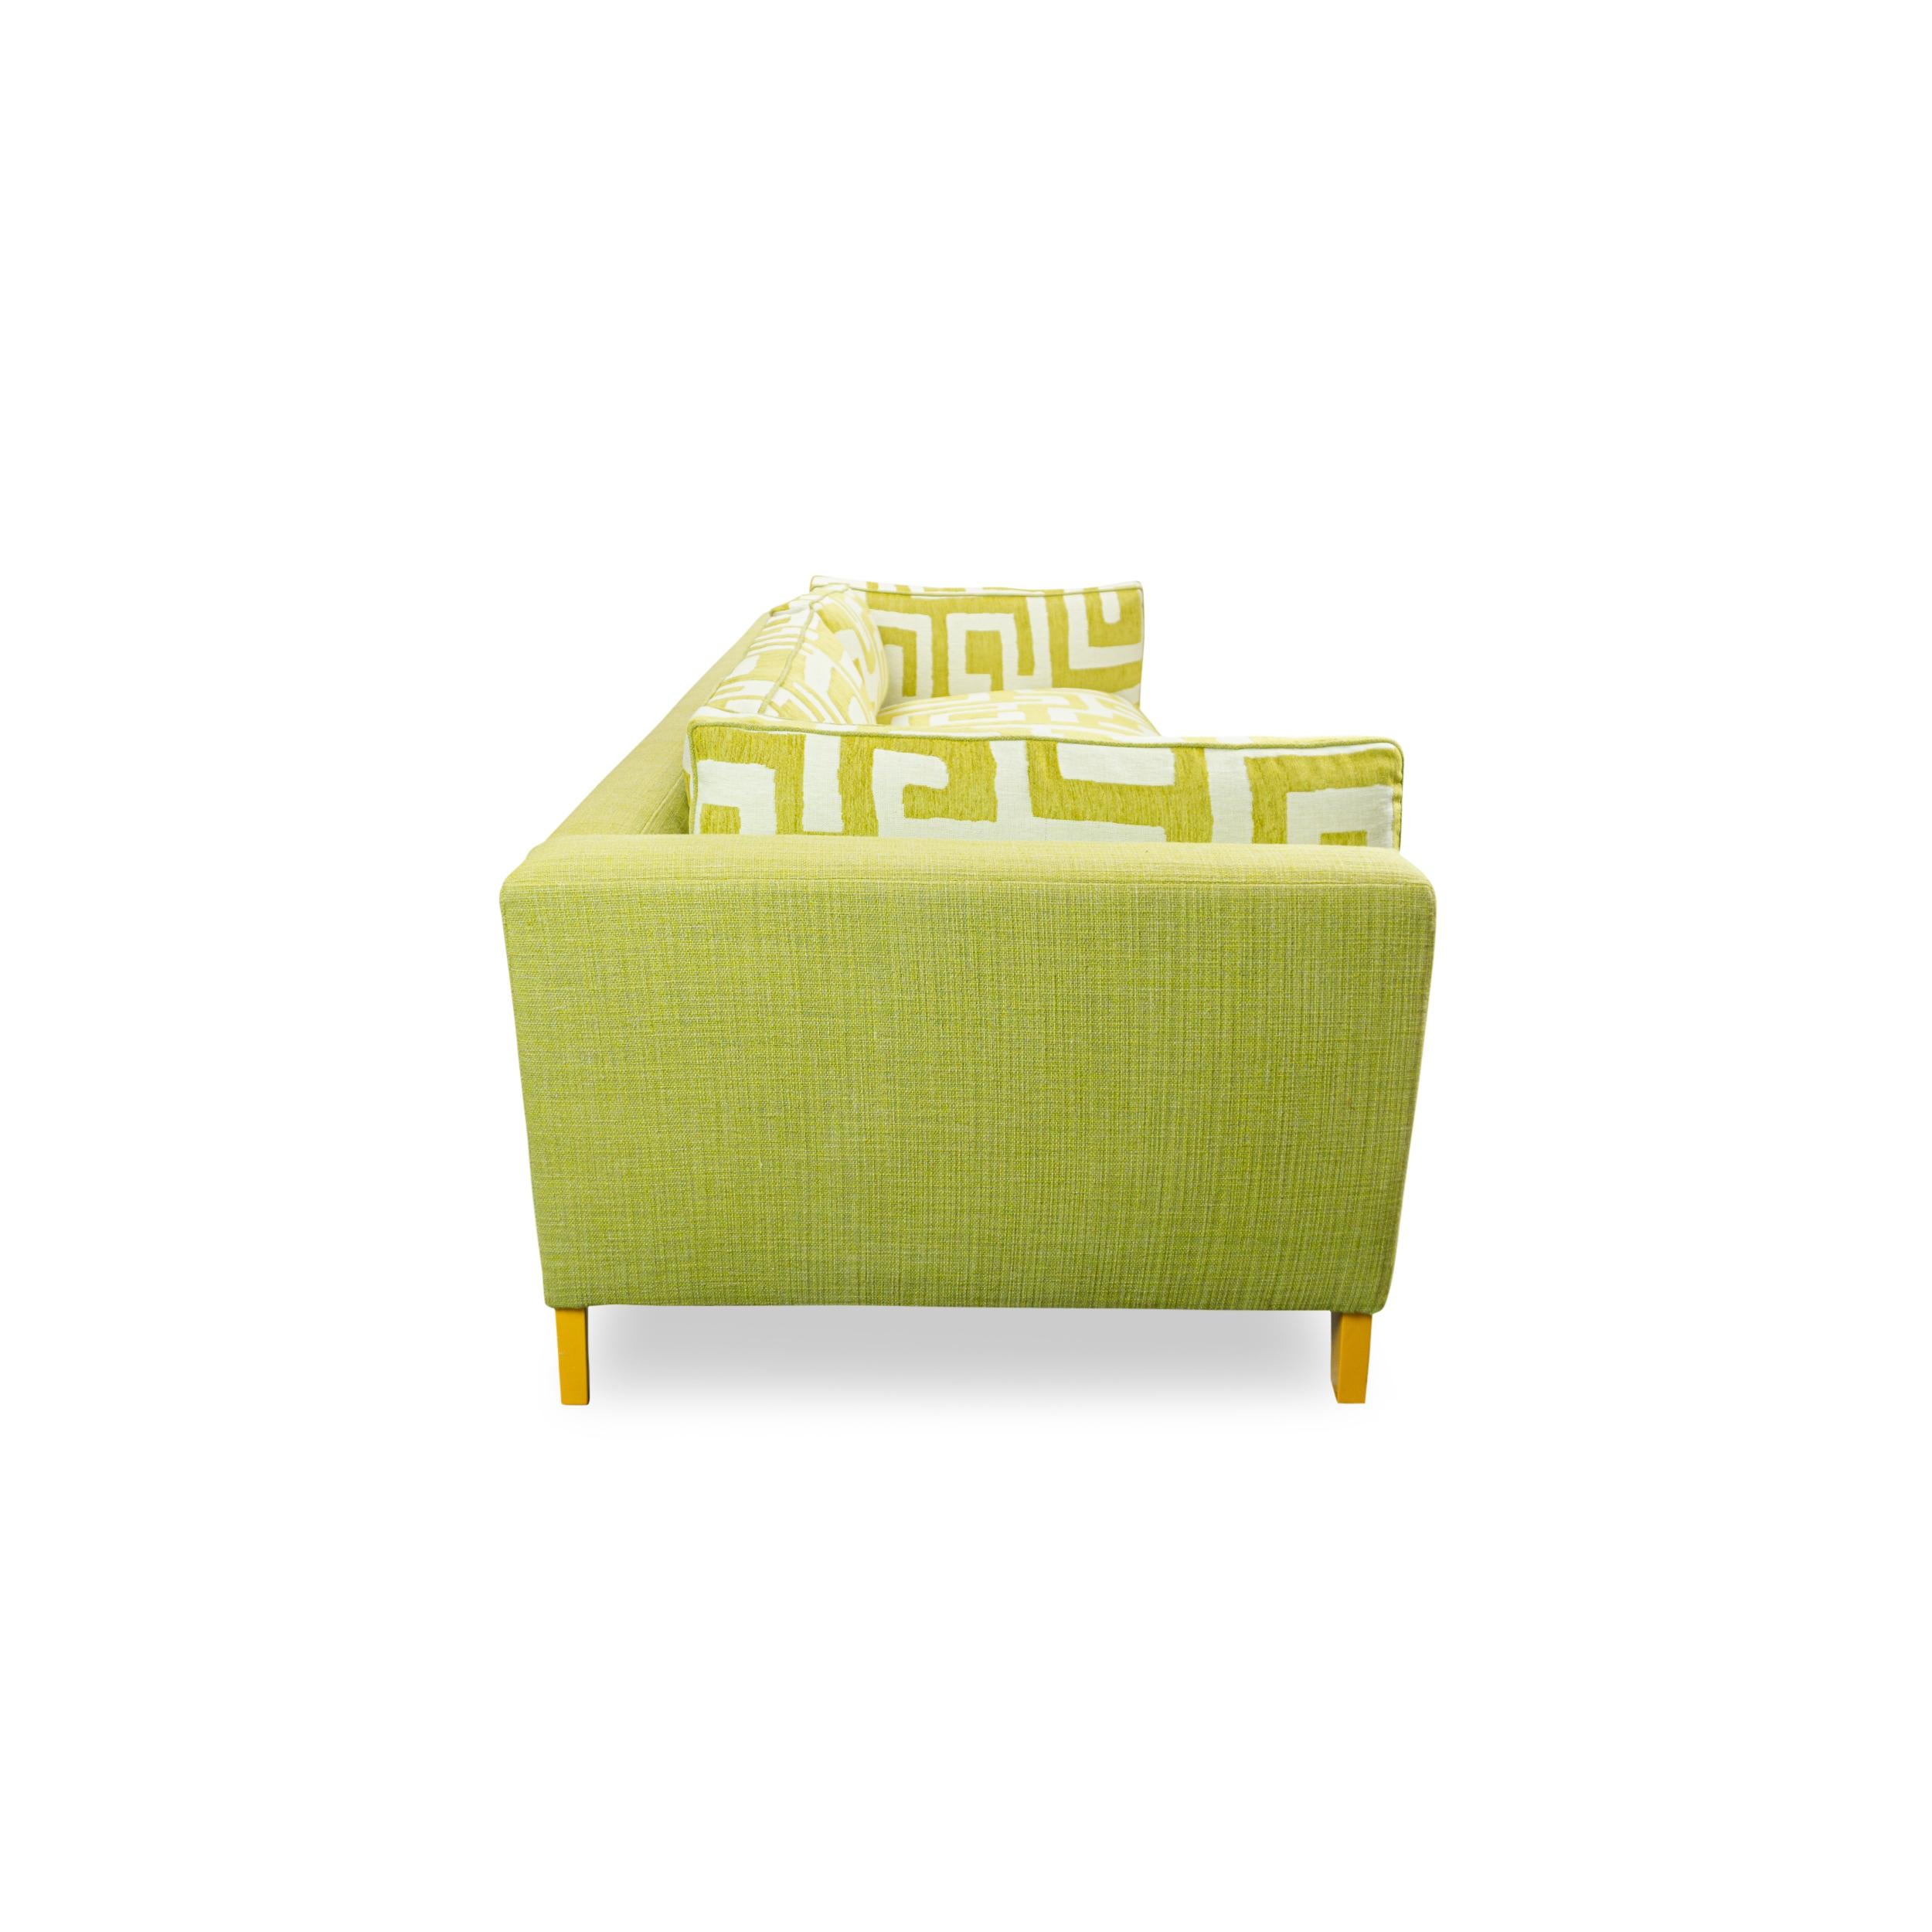 Lacquered Lime Green Bench Cushion Sofa with Maze Pattern Cushions and Sunflower Feet For Sale